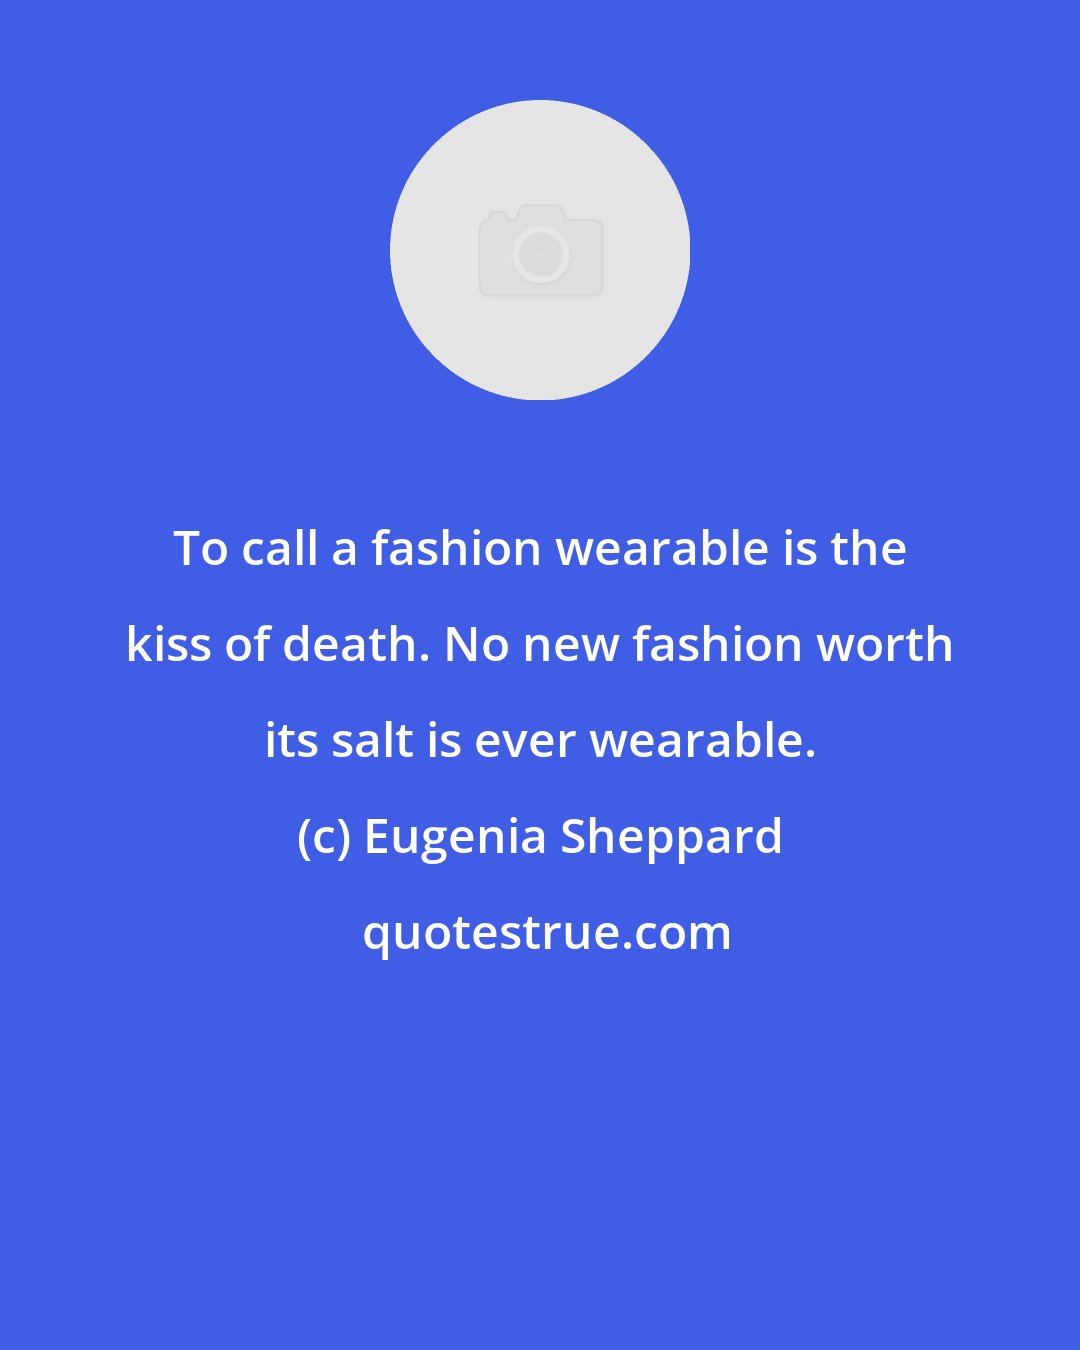 Eugenia Sheppard: To call a fashion wearable is the kiss of death. No new fashion worth its salt is ever wearable.